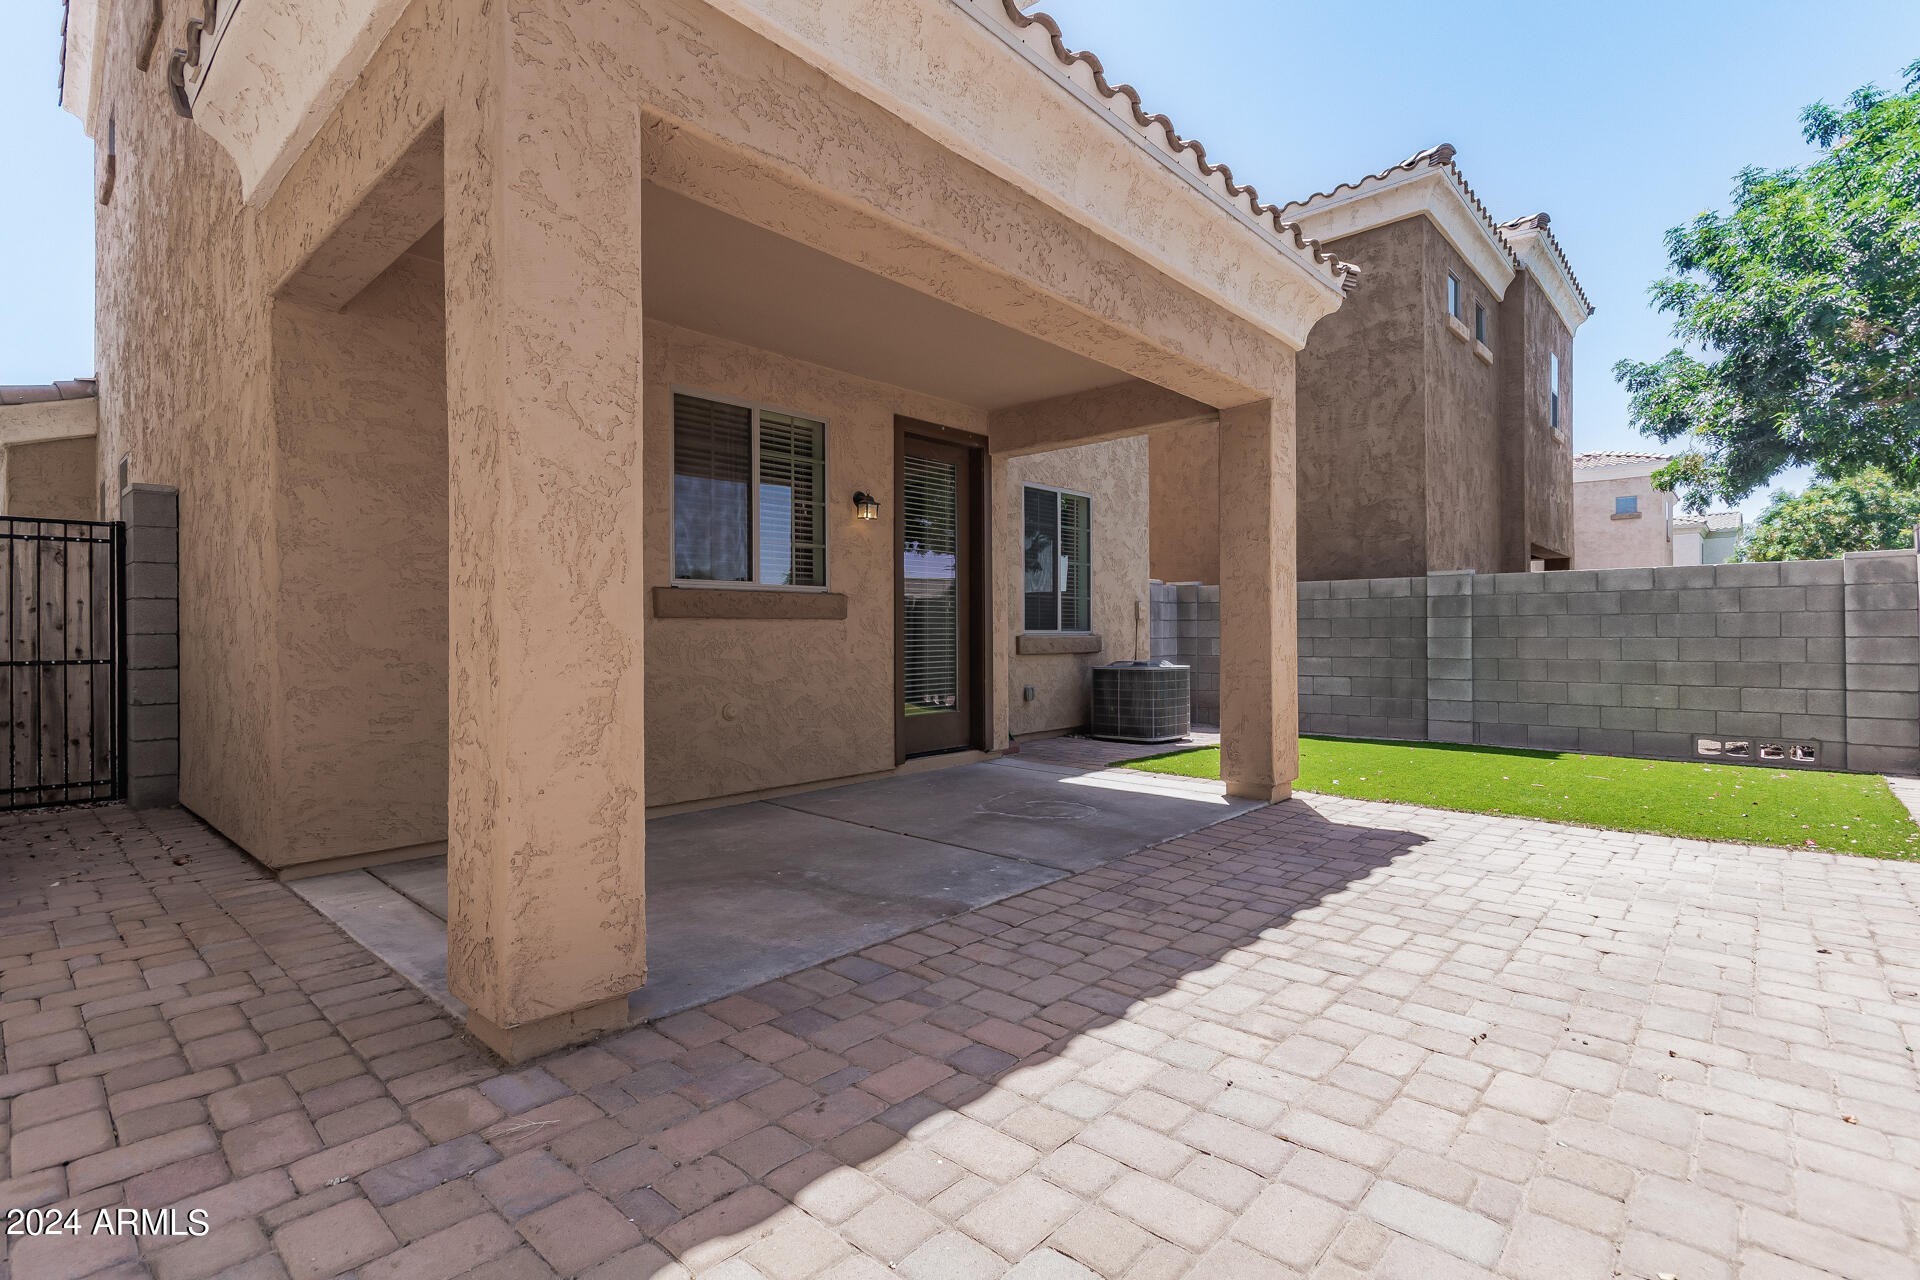 27. 1631 S Desert View Place